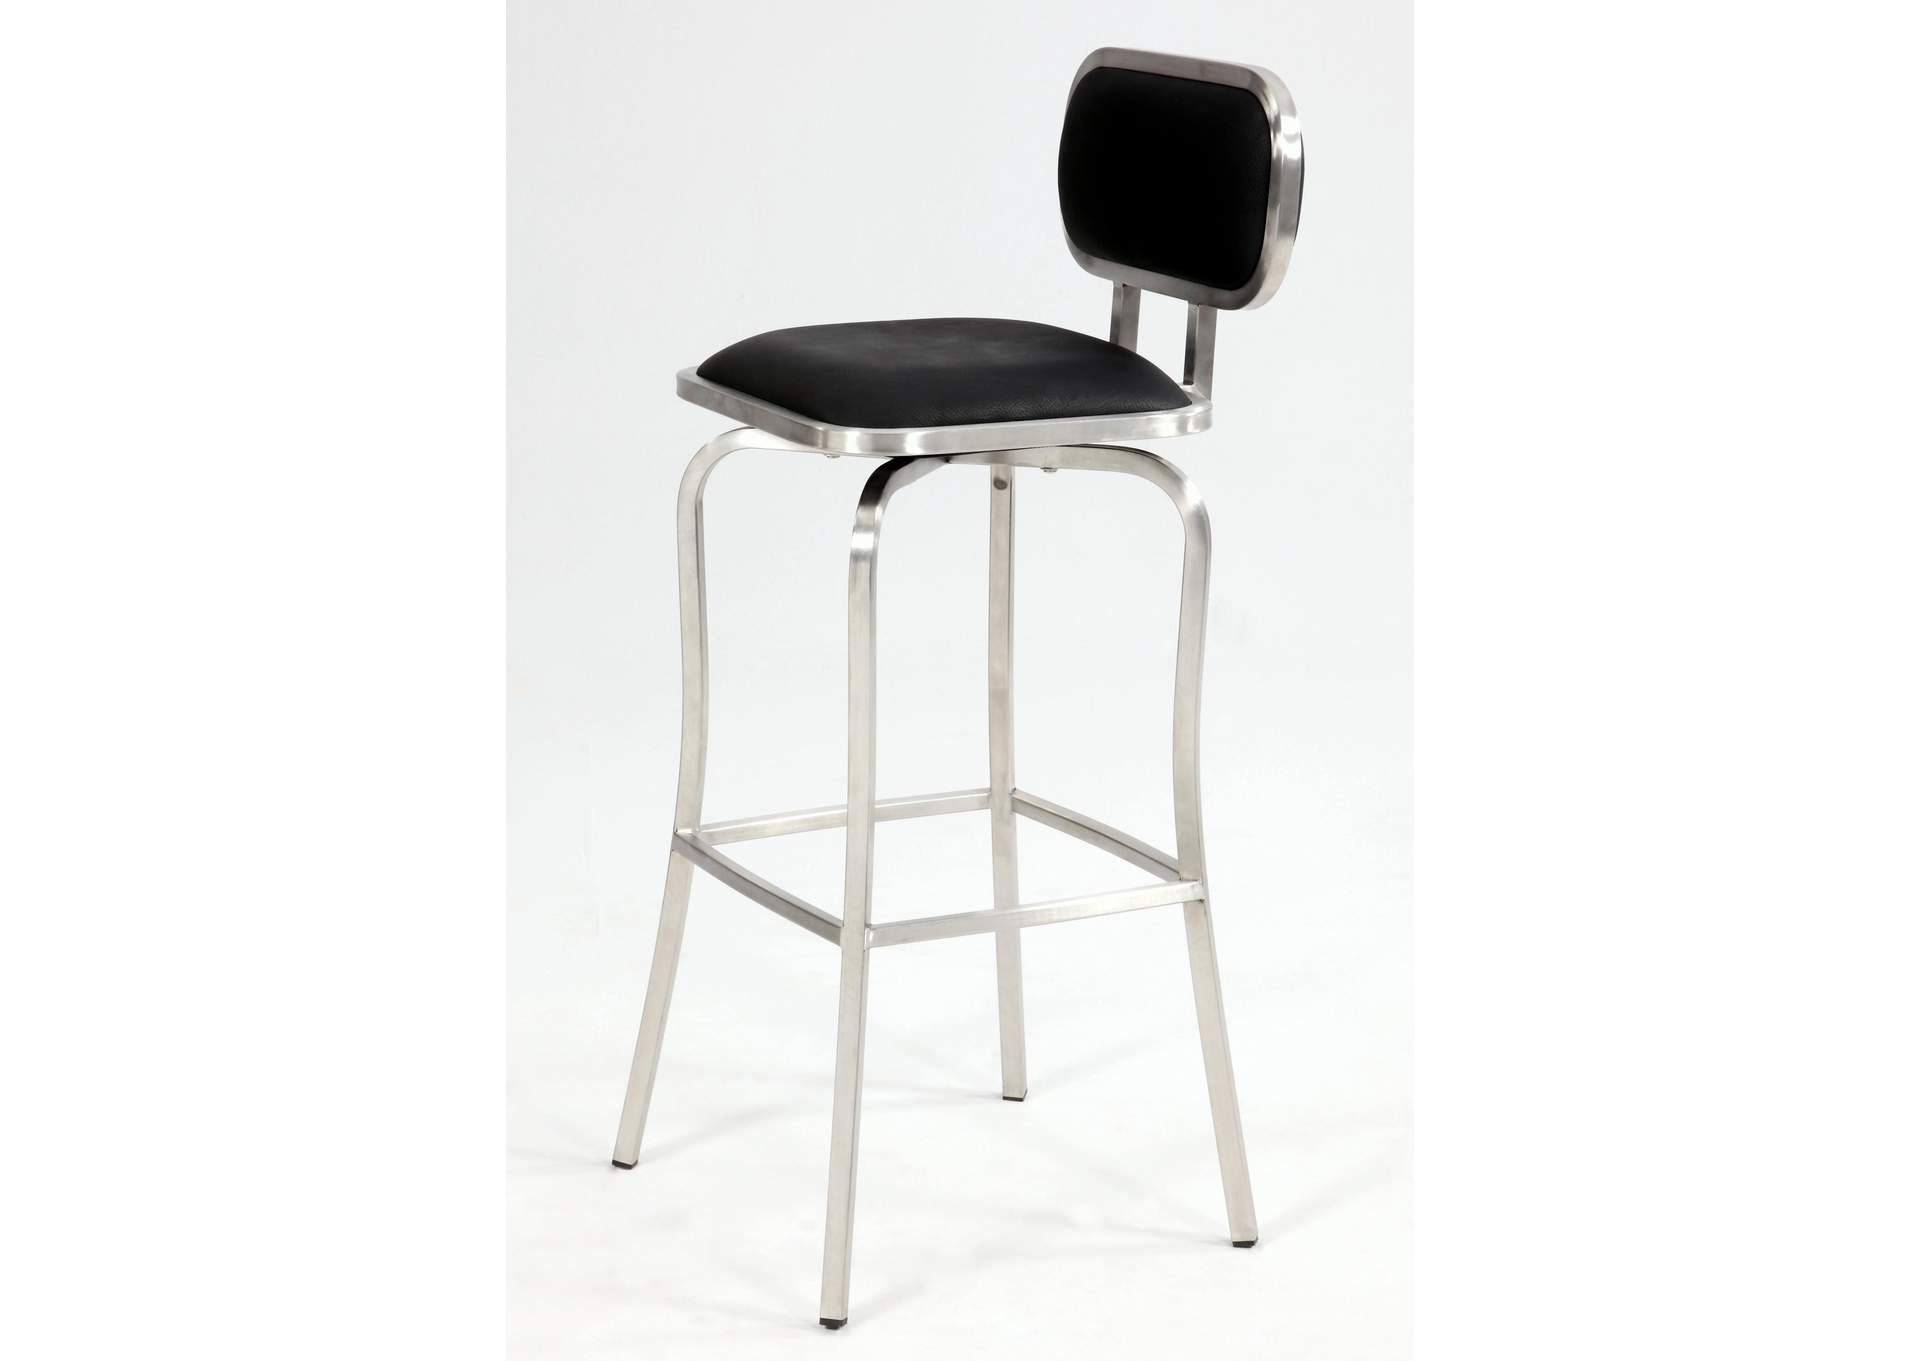 Modern Counter Height Stool w/ Memory Swivel,Chintaly Imports